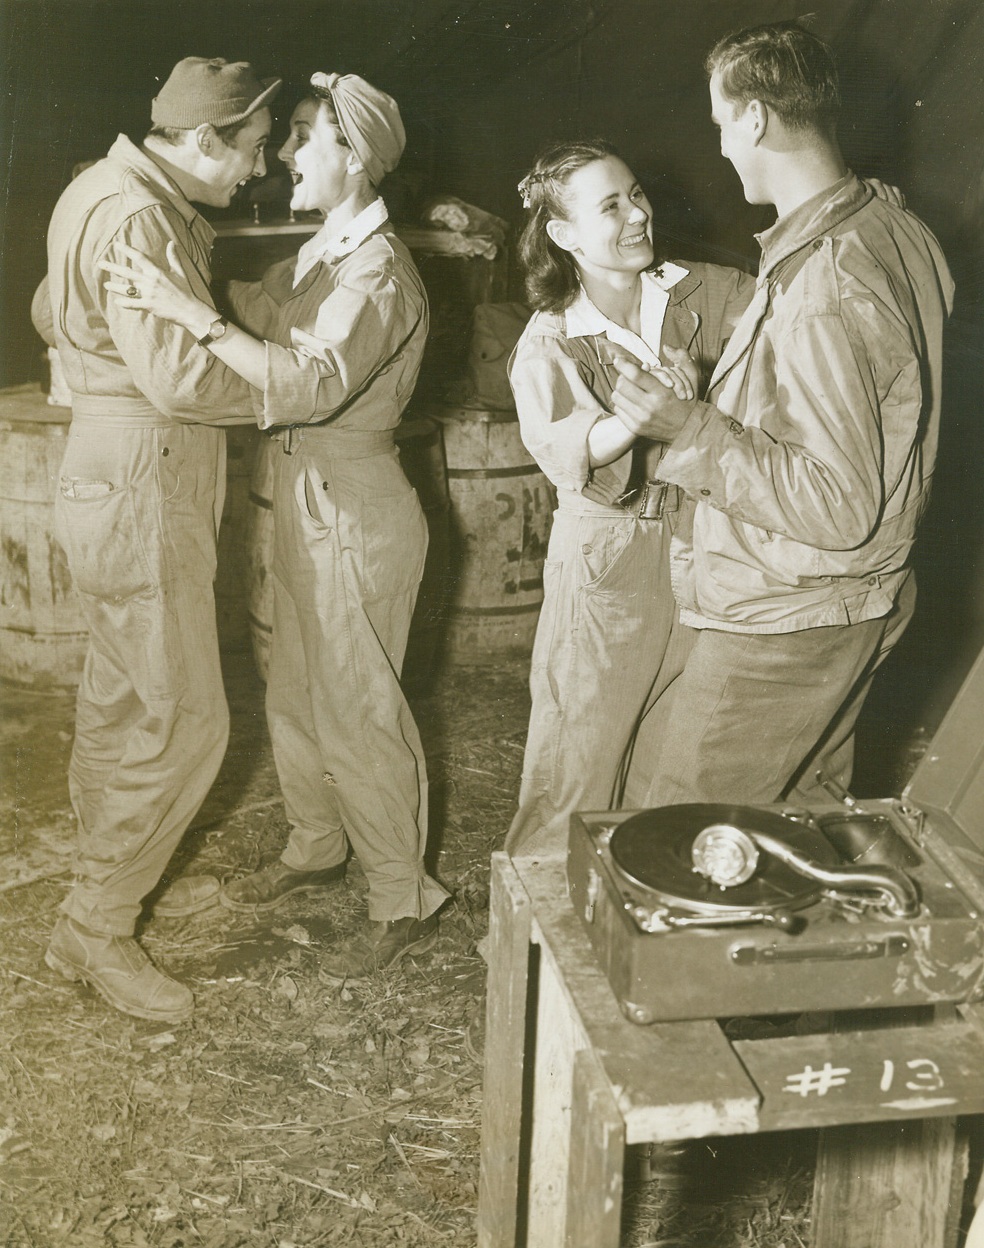 Frolic at the Front, 11/28/1943. SOMEWHERE IN ITALY -- It's a festive occasion at the Italian front as the guys and gals drag out a portable phonograph and cut a figurative rug on foreign soil. At left, dancing with Lois Berney of Fallon, N.C., is Pfc Clyde Burgess of Tolcoa, Ga. Dancing at right are Mary Ross Mohen of Unawa, Iowa and Pvt. William Maderra of Rayland, Ohio. The girls are Red Cross workers whose job is to boost the morale of Fifth Army men.  Credit Line - WP - (Photo by Bert Brandt, Acme Correspondent for War Picture Pool);